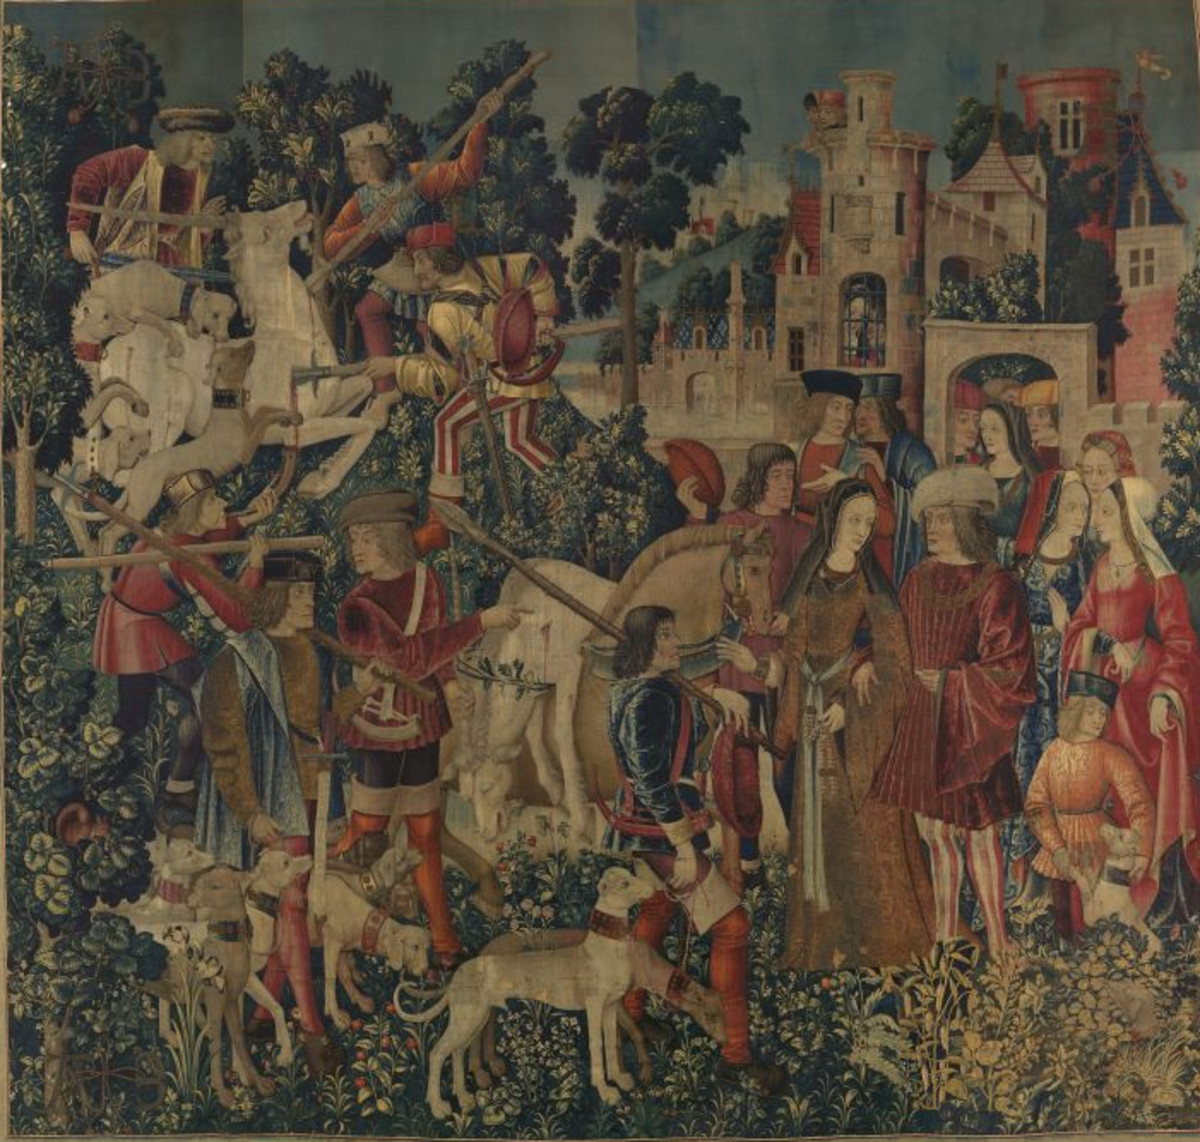 Tapestry 6: The Unicorn is Killed and Brought to the Castle. In this tapestry, separate scenes are depicted. In the upper left-hand corner, the unicorn is killed, and shown front and center is the transportation of the dead unicorn on a horse’s back. In some contexts, the unicorn is an allegory for Christ; the large holly tree (often a symbol of Christ’s Passion) rising from behind his head may conceivably be linked to this association. In the other scene, at right, a lord and lady receive the body of the unicorn in front of their castle. They are surrounded by their attendants, with more curious onlookers peering through windows of the turret behind them. The dead animal is slung on the back of a horse, his horn already cut off but still entangled in thorny oak branches—perhaps an allusion to the Crown of Thorns.